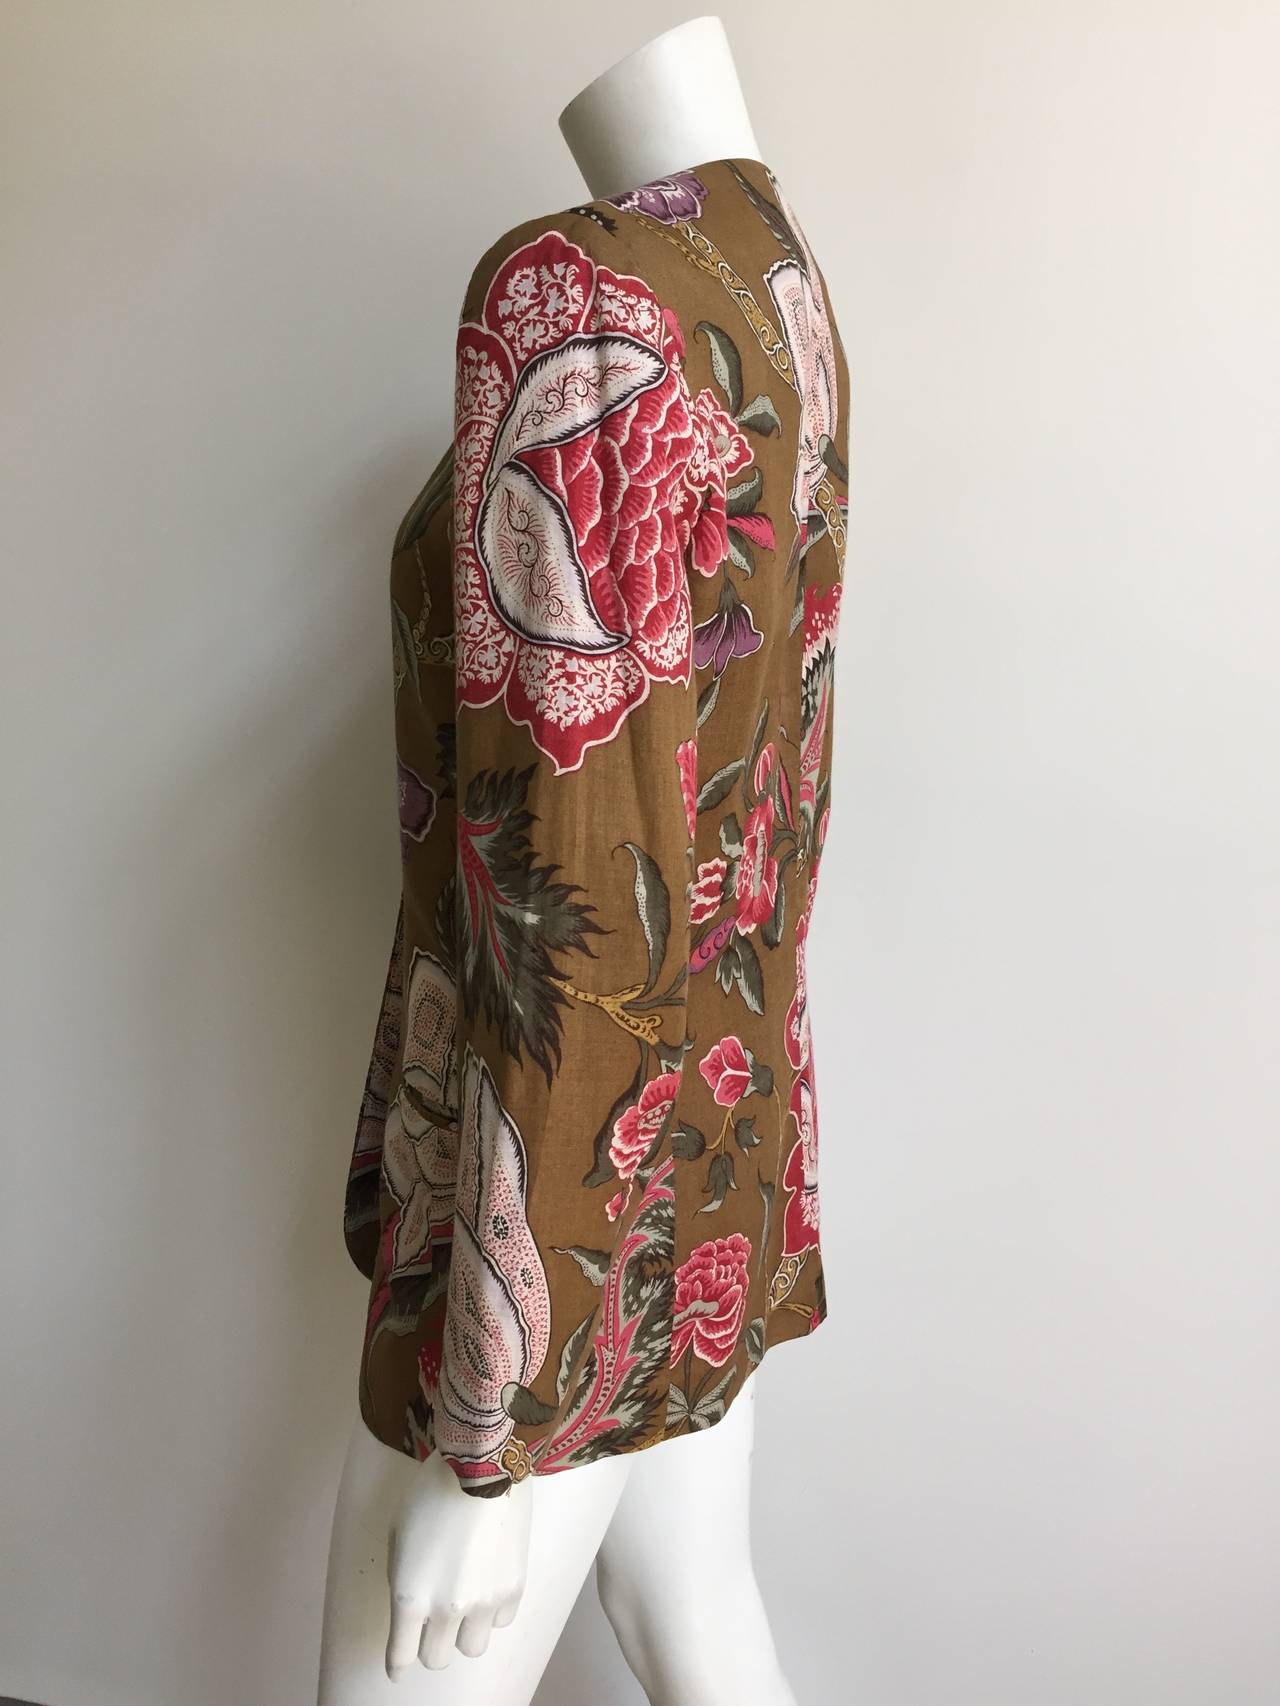 Gloria Sachs for Bergdorf Goodman Cotton Jacket Size 6. For Sale at 1stdibs